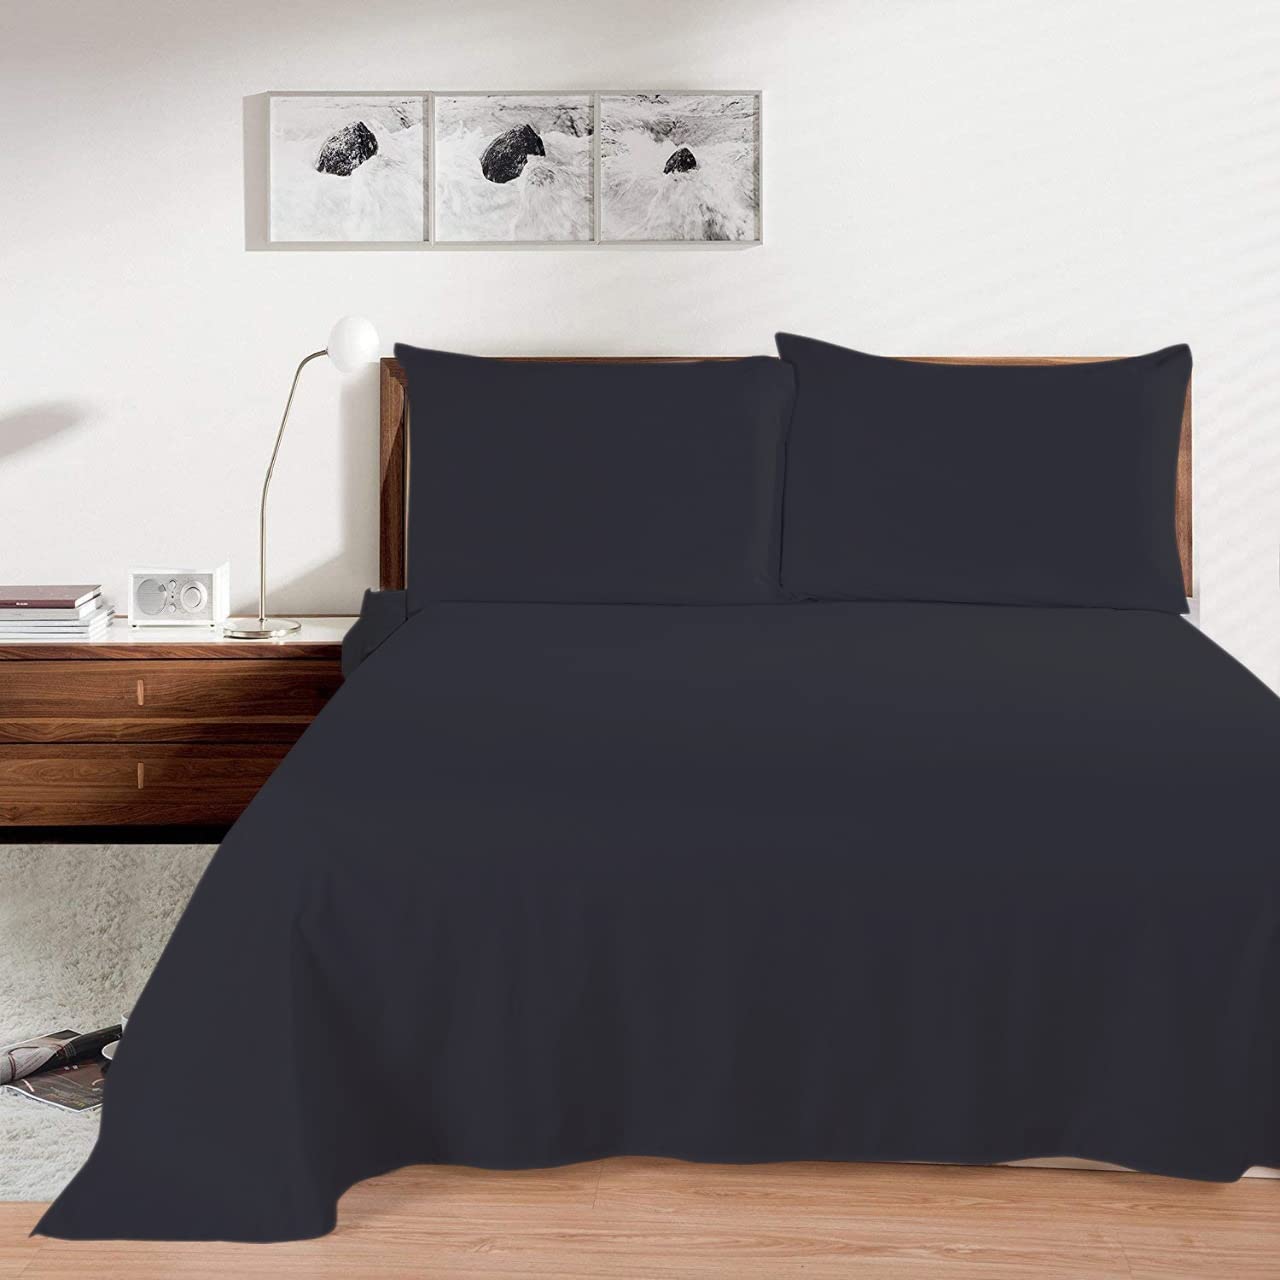 California King Size 100% Egyptian Cotton Flat Bed Sheet, Easy to Wash 800 Thread Count California King Size 1Pc Flat Sheets - 108 Inches x 110 Inches - Ivory Solid